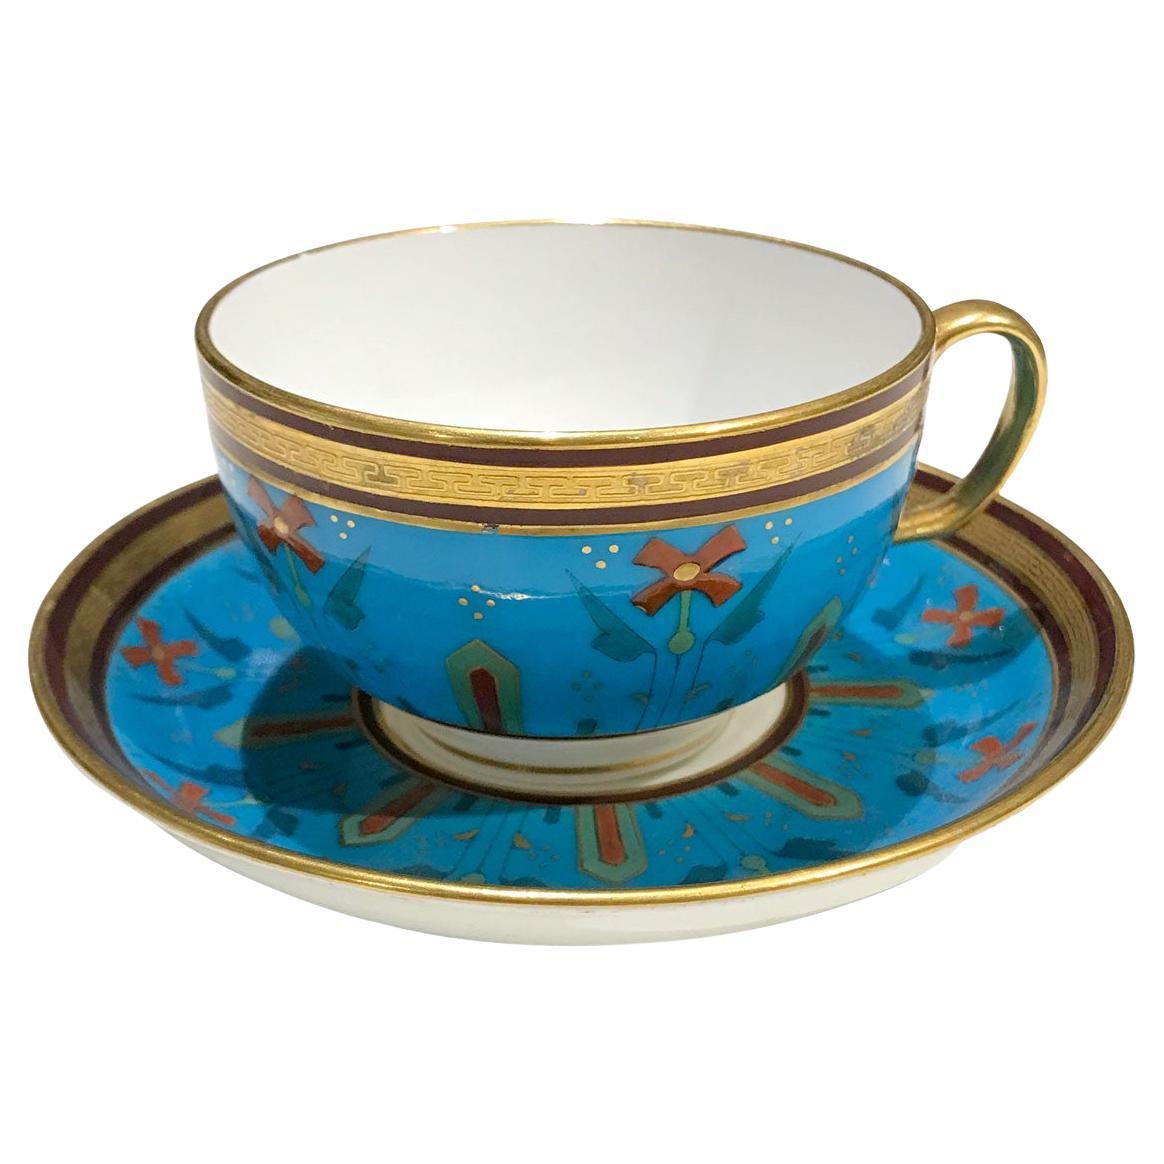 Minton Tea cup attributed to Christopher Dresser, 1871